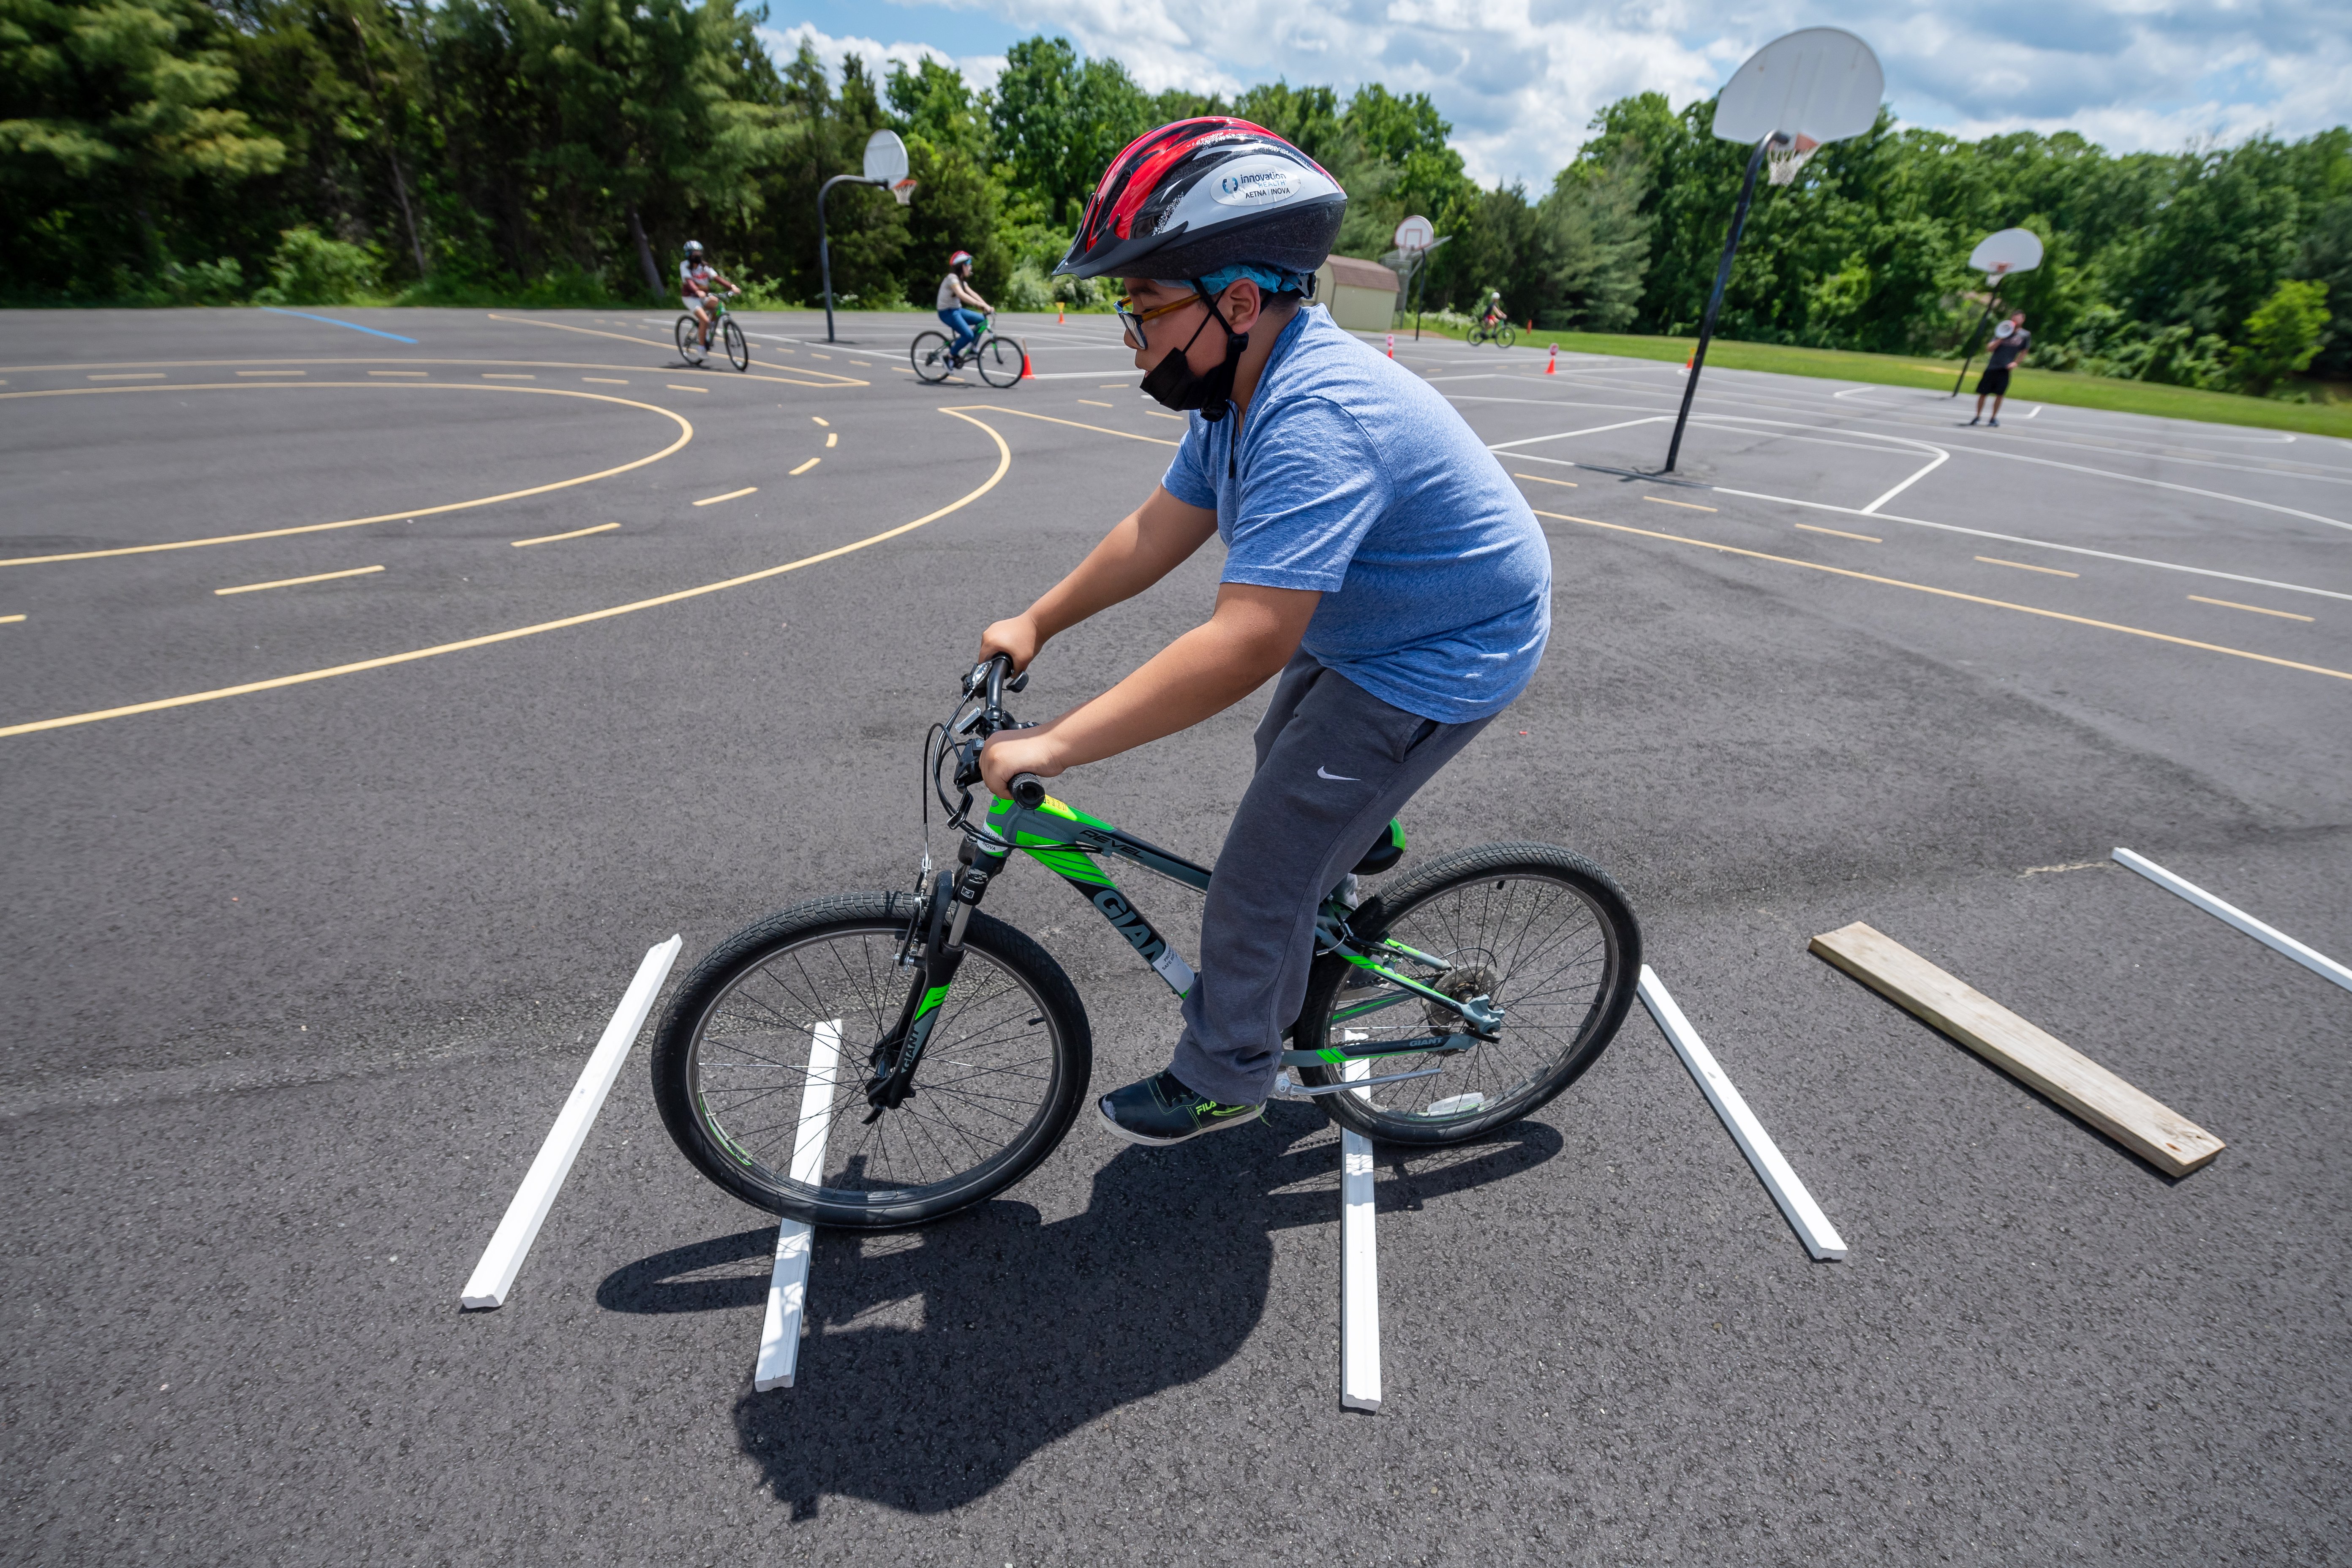 Students practice going over obstacles during their bike safety unit at Poe Middle School.